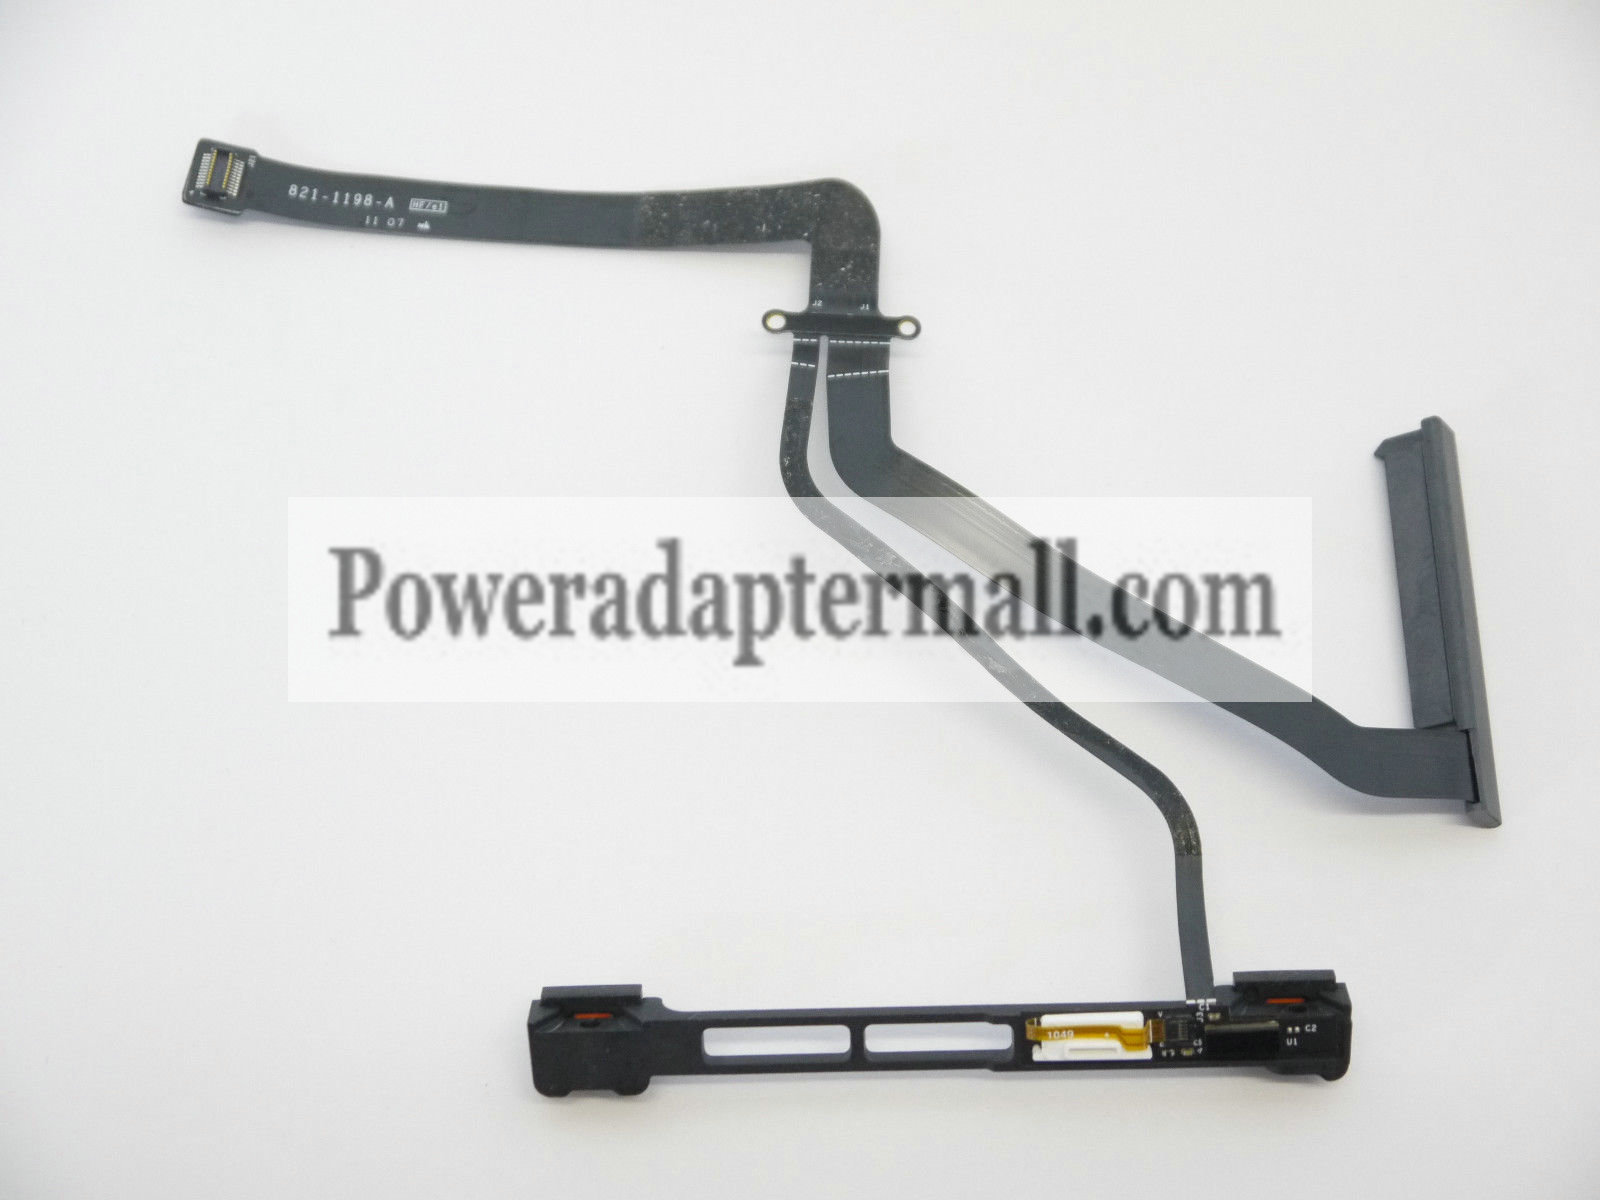 HDD Hard Drive Cable Bracket 821-0812-A for MacBook Pro 15"A1286